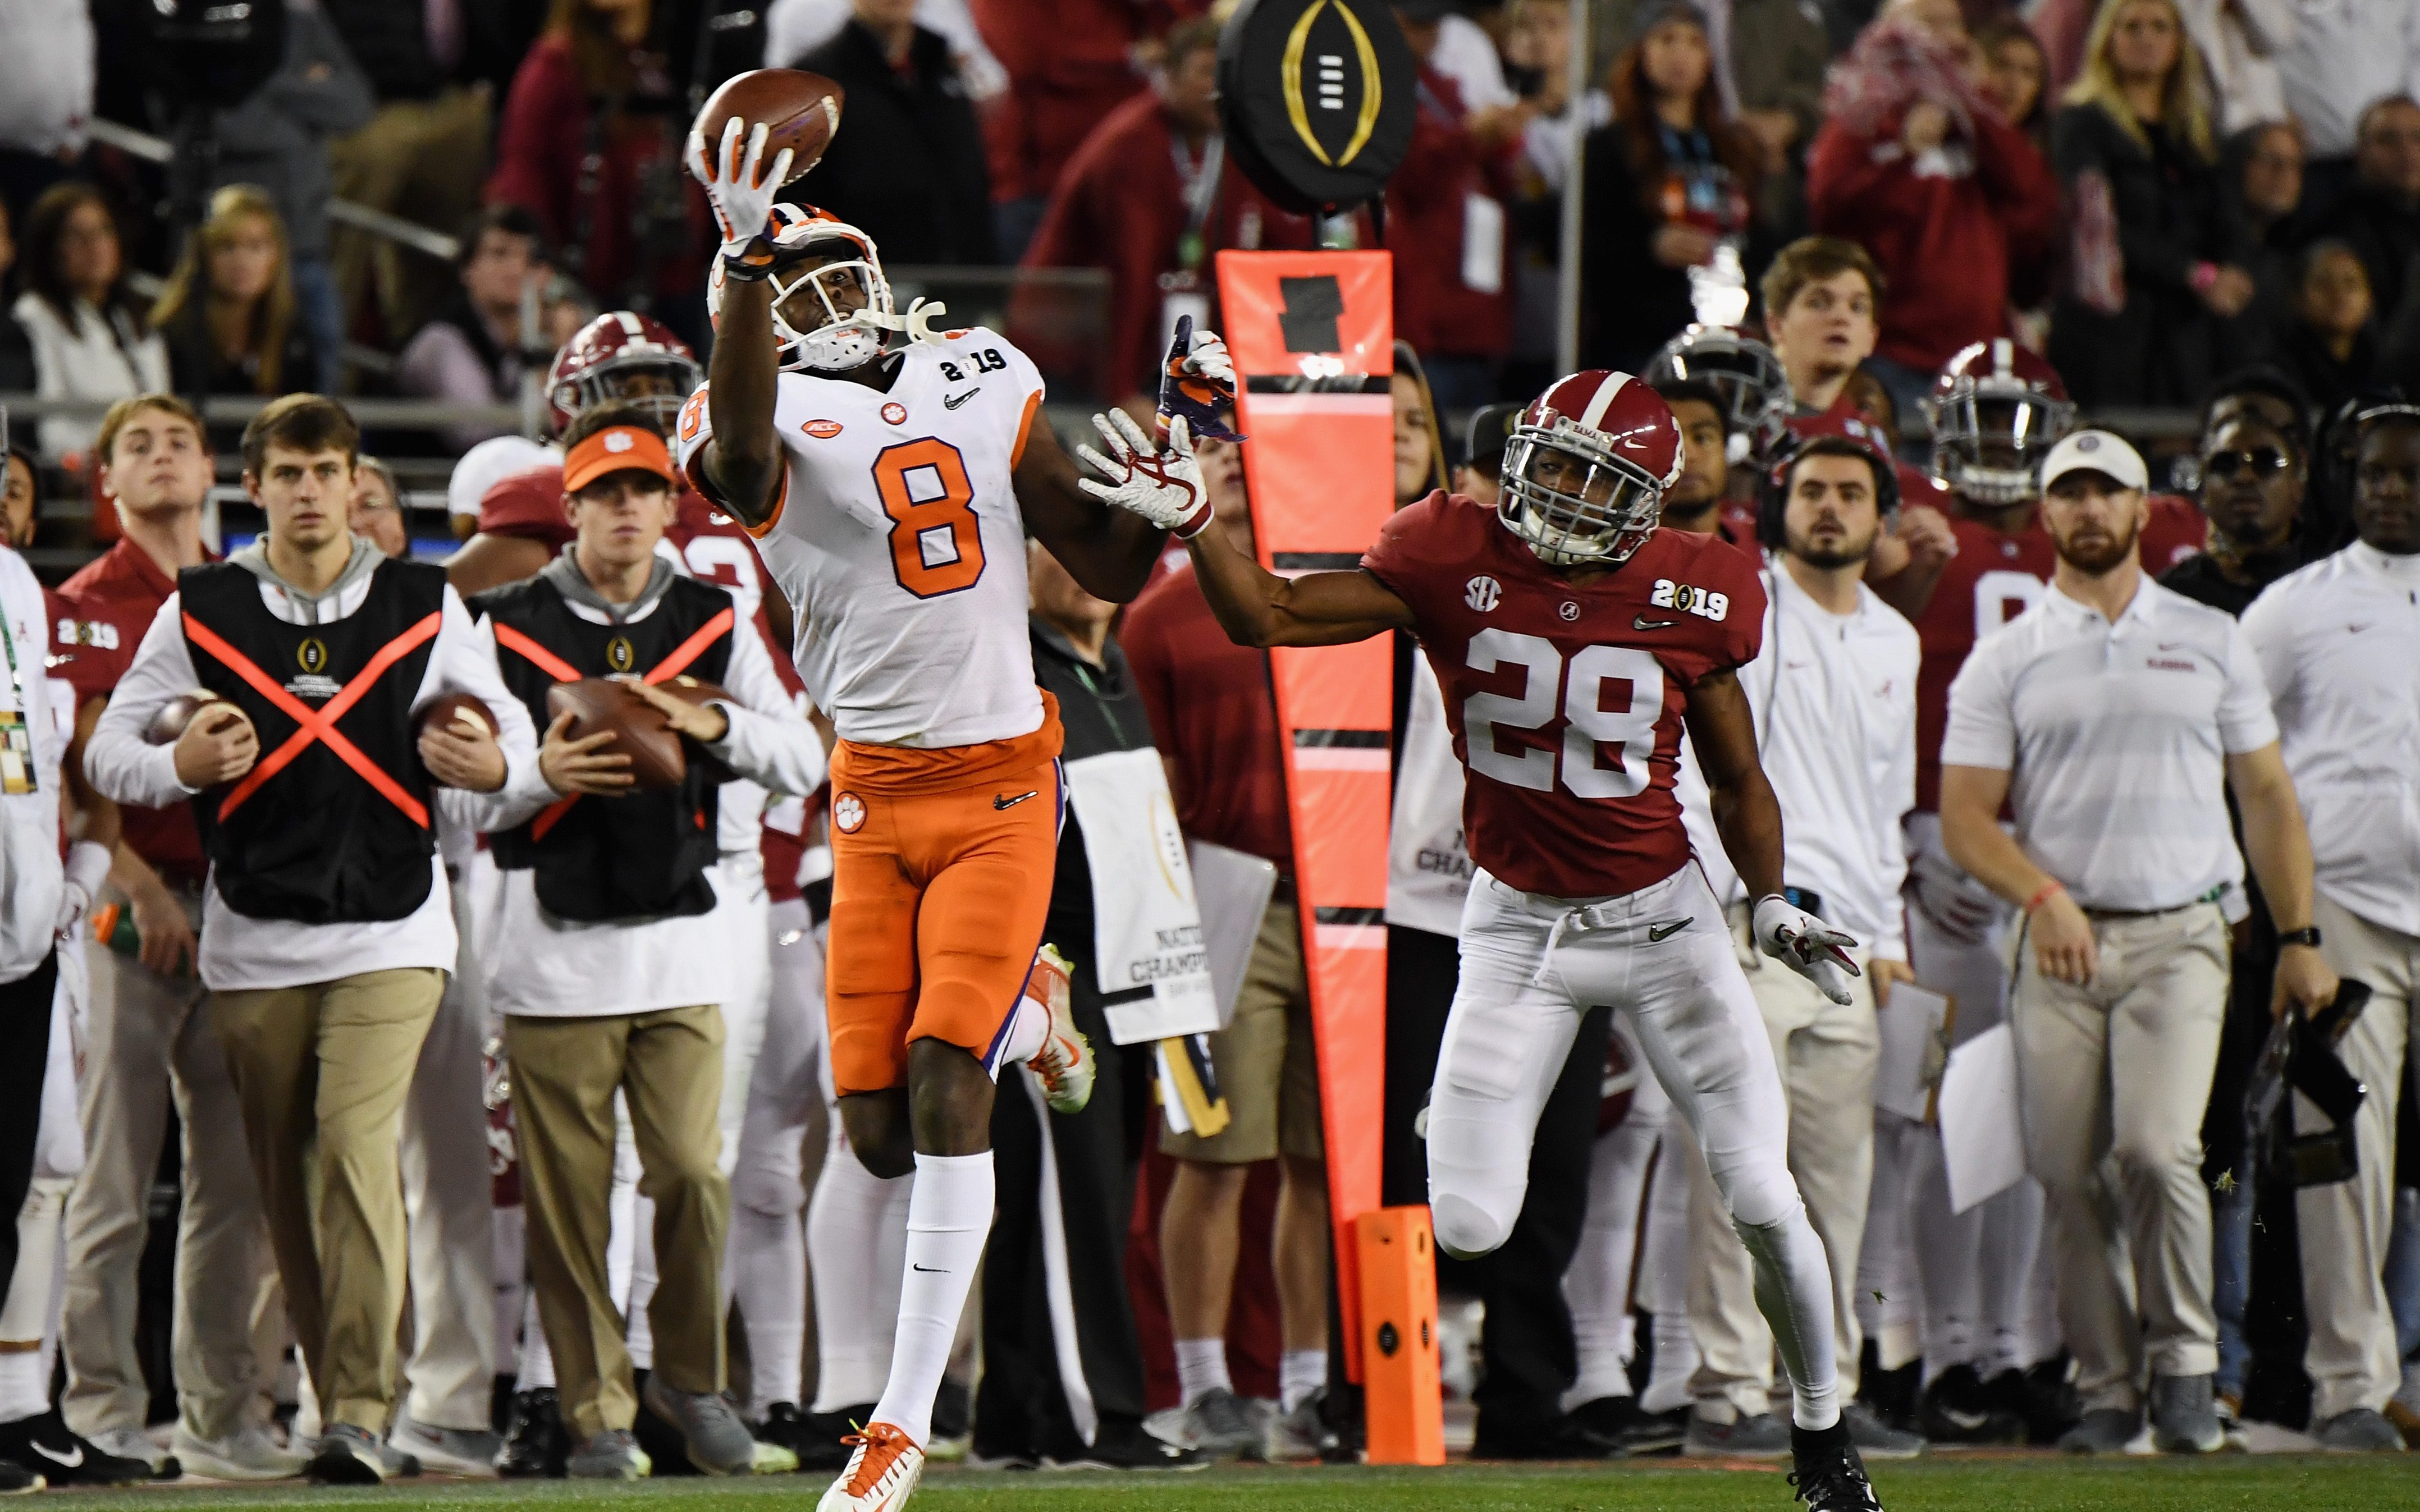 Clemson’s Justyn Ross Makes Unreal One-Handed Catch vs. Alabama (VIDEO